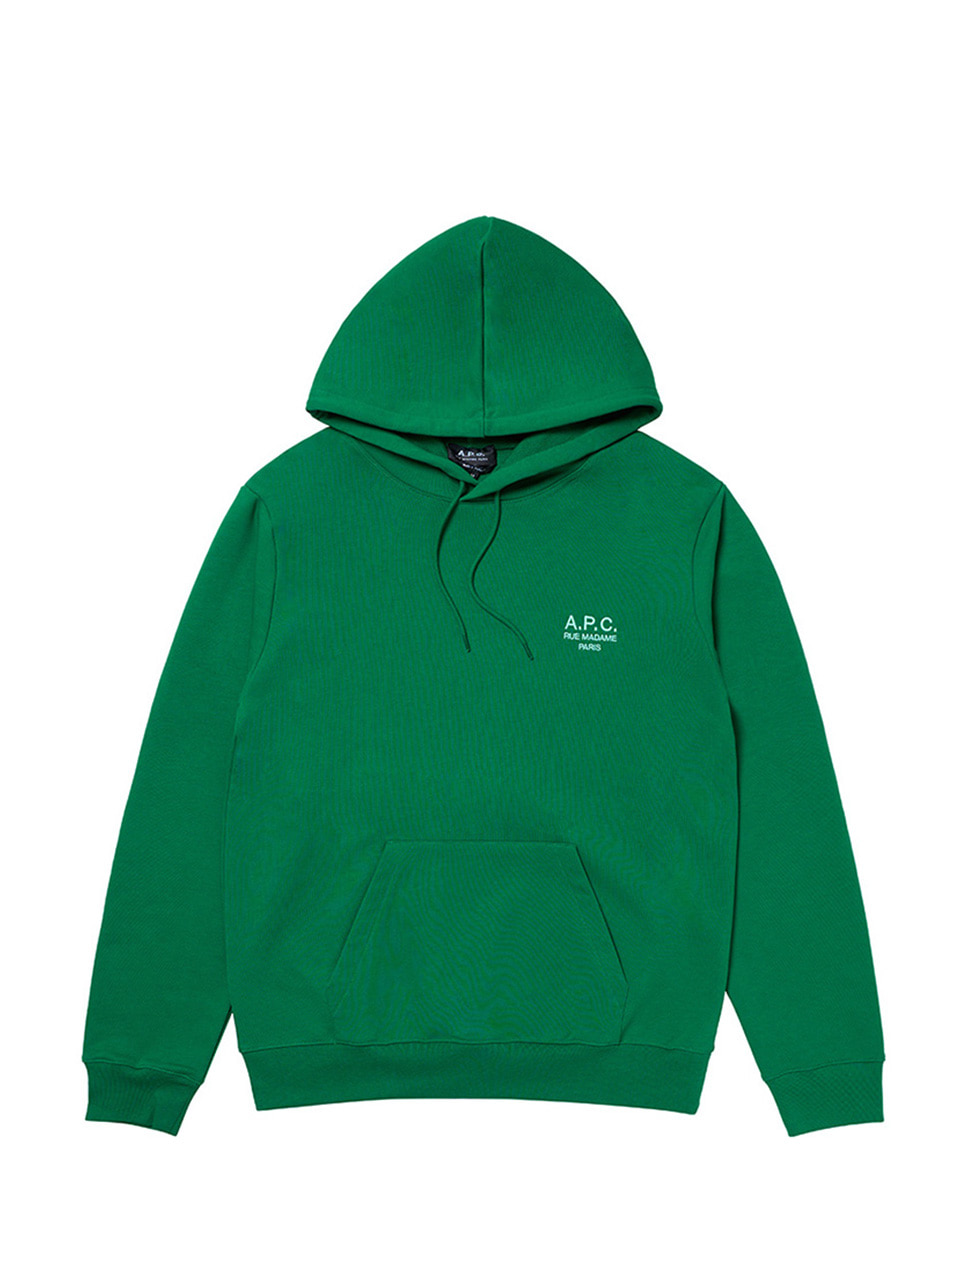 A.P.C - HOODIE MARVIN (GREEN)